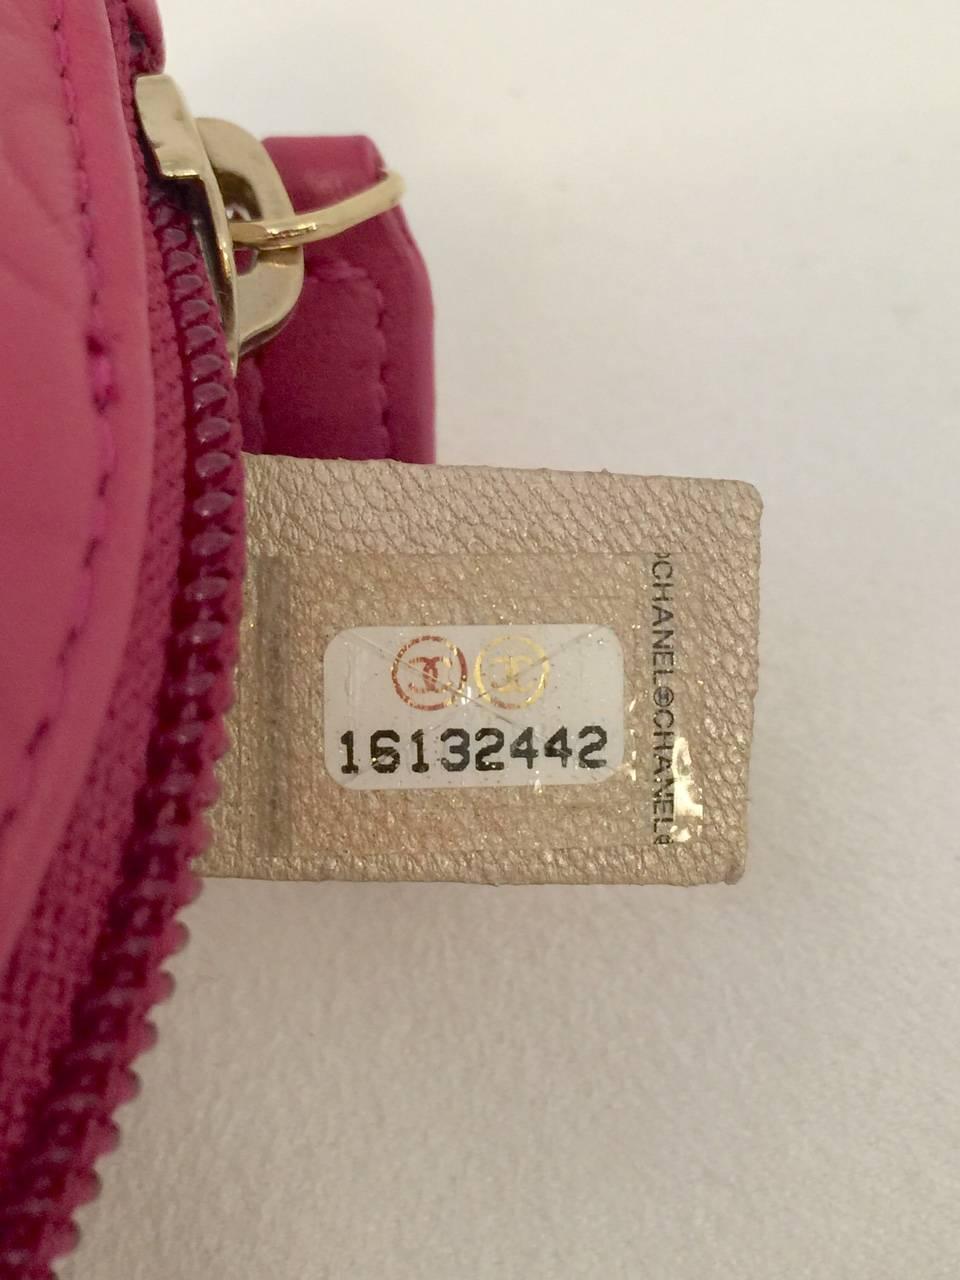 Red Chanel Fuchsia Camellia Stamped Leather O-Key Holder With Box Serial No 16132442